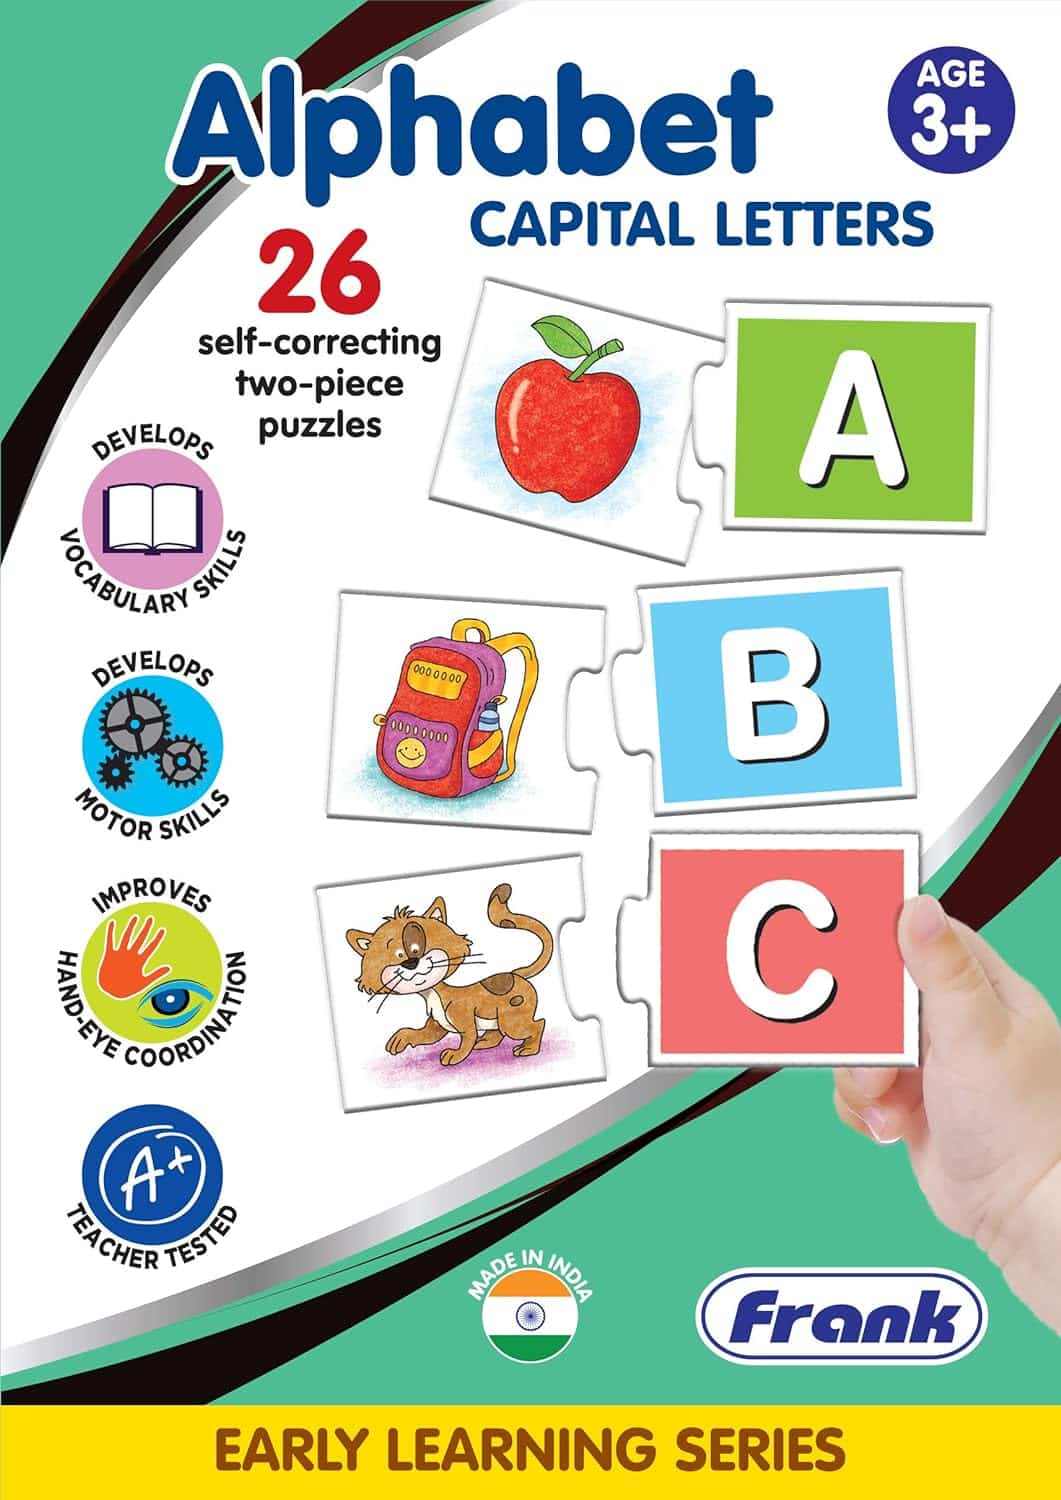 Frank Alphabet Capital Letters Puzzle – 52 Pieces, 26 Self-Correcting 2-Piece Puzzles, Early Learner Educational Jigsaw Puzzle Pair Set with Images | Ages 3 & Above | Educational Toys and Games